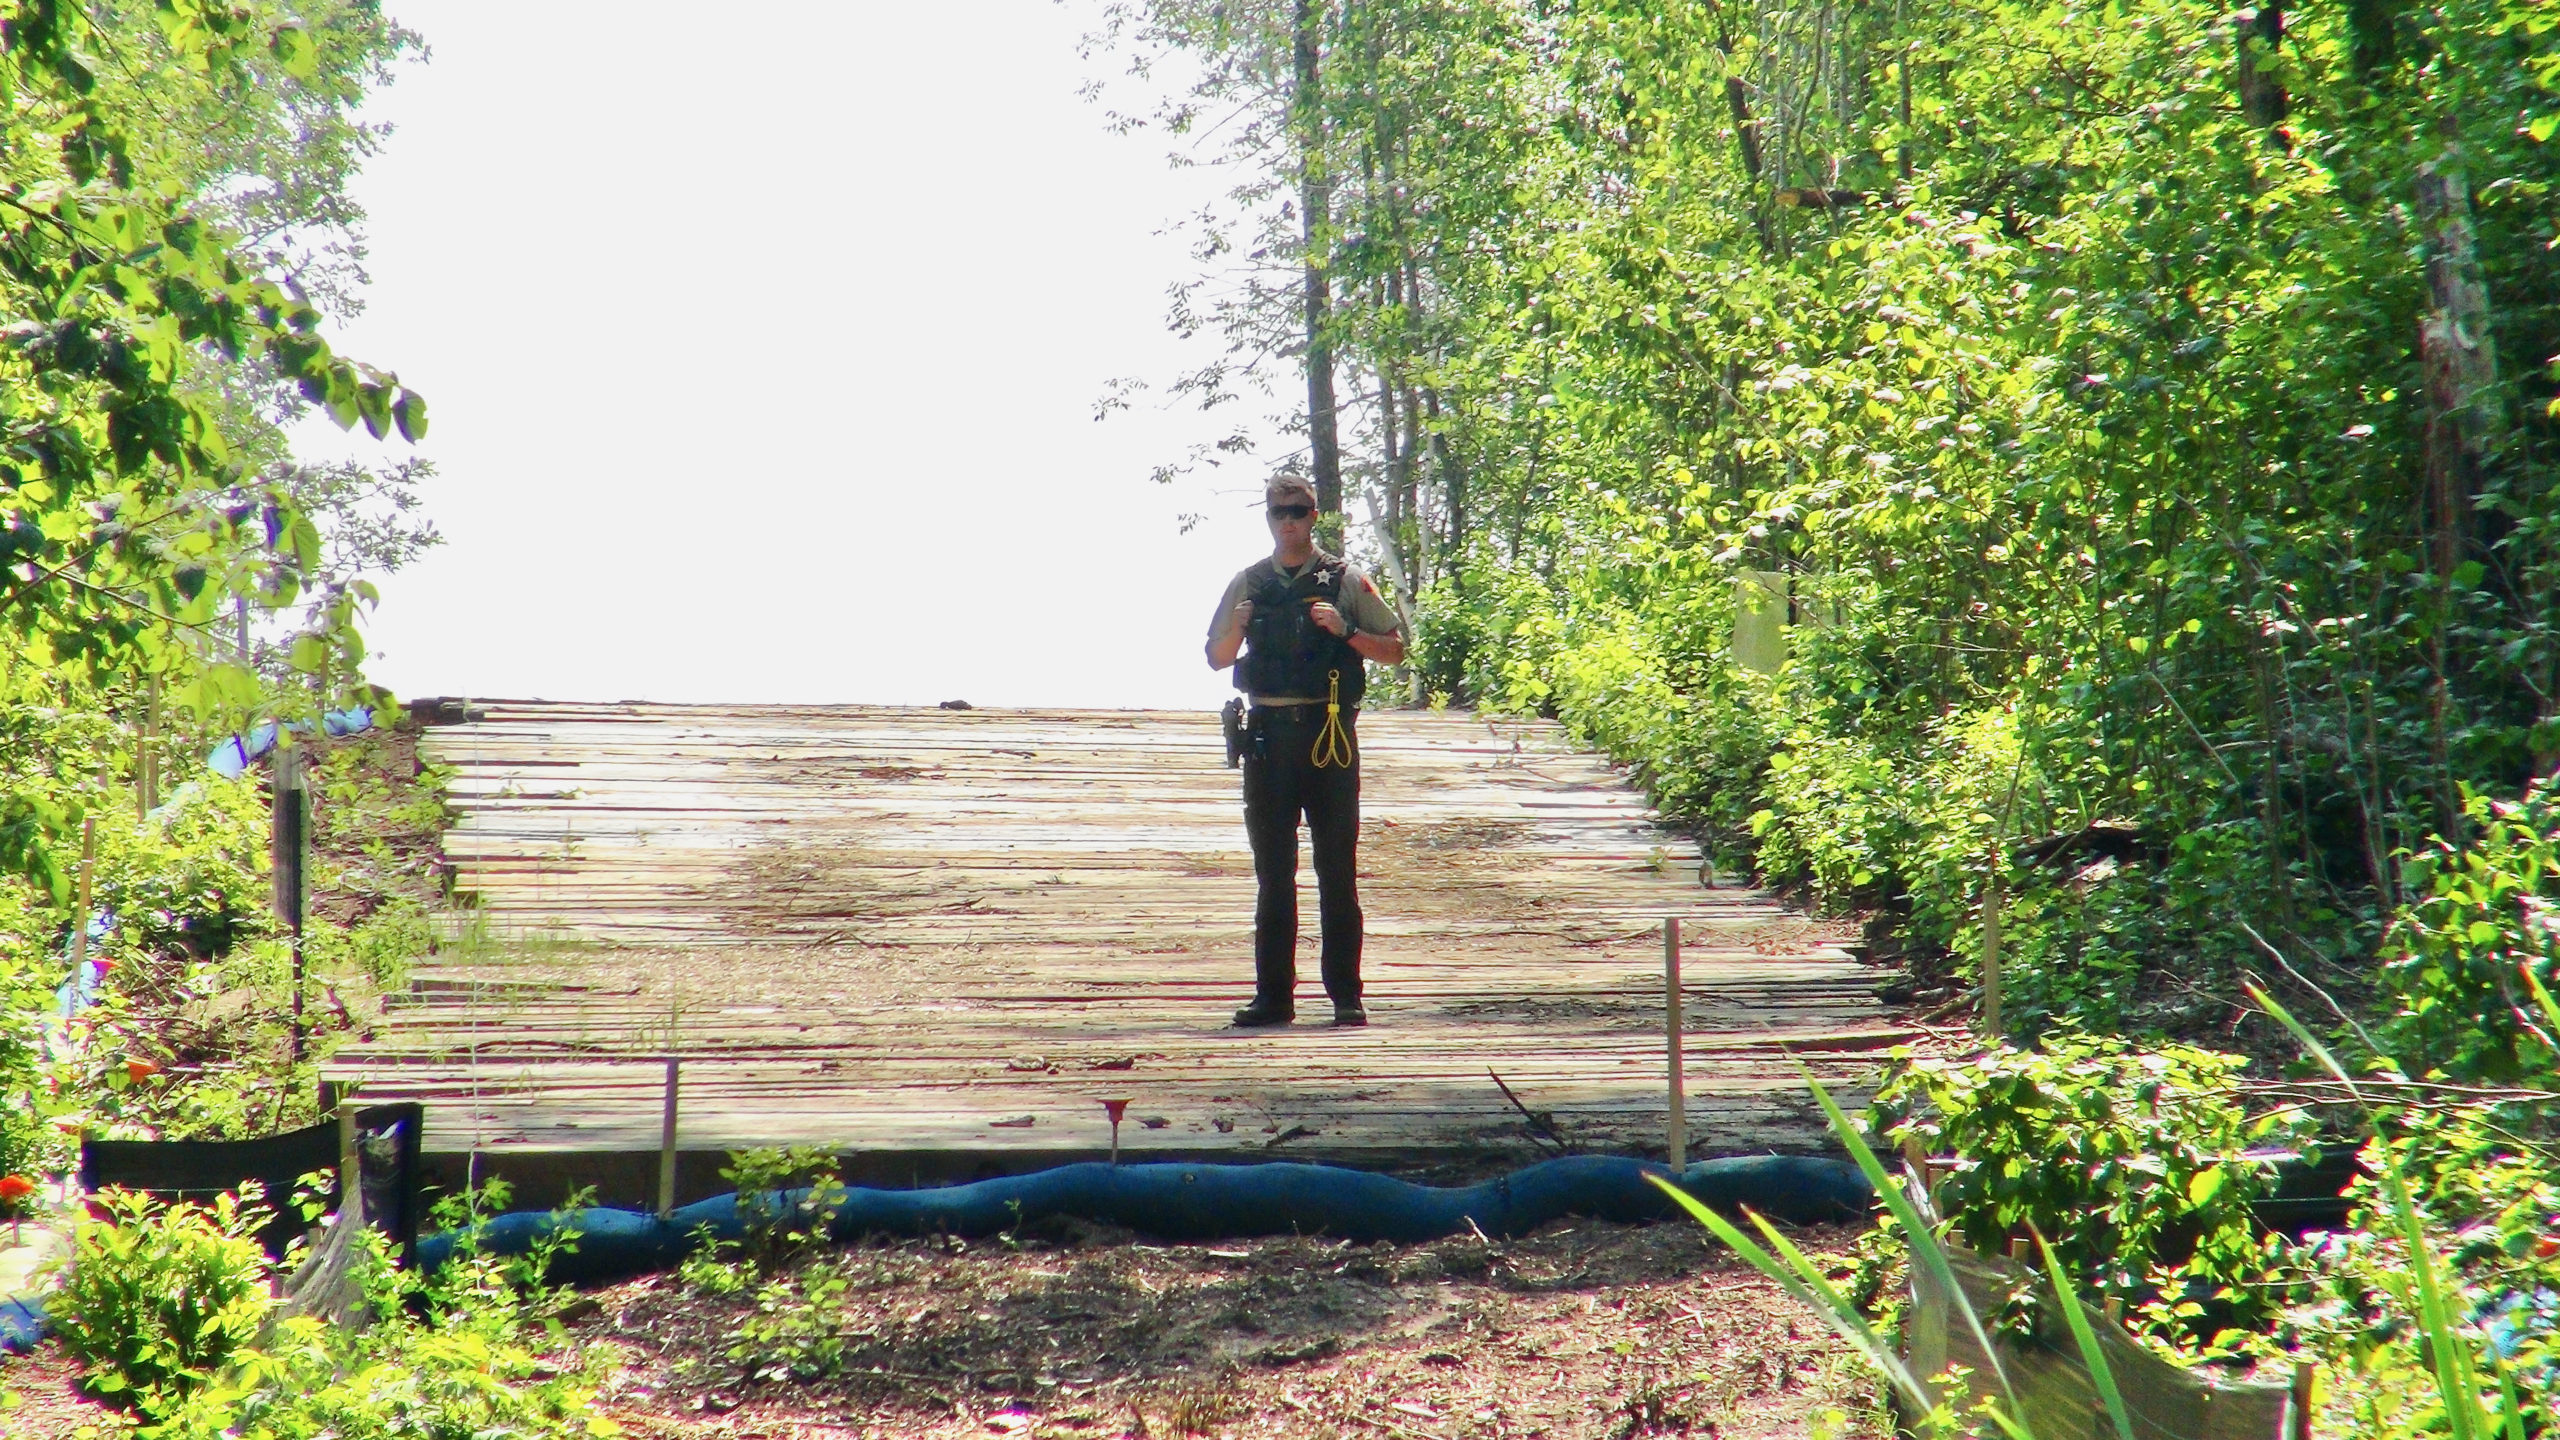 Law enforcement arrived on the Enbridge easement as scientists conducted water monitoring experiments. An easement is the point at which a jurisdiction grants an entity permission to cross.